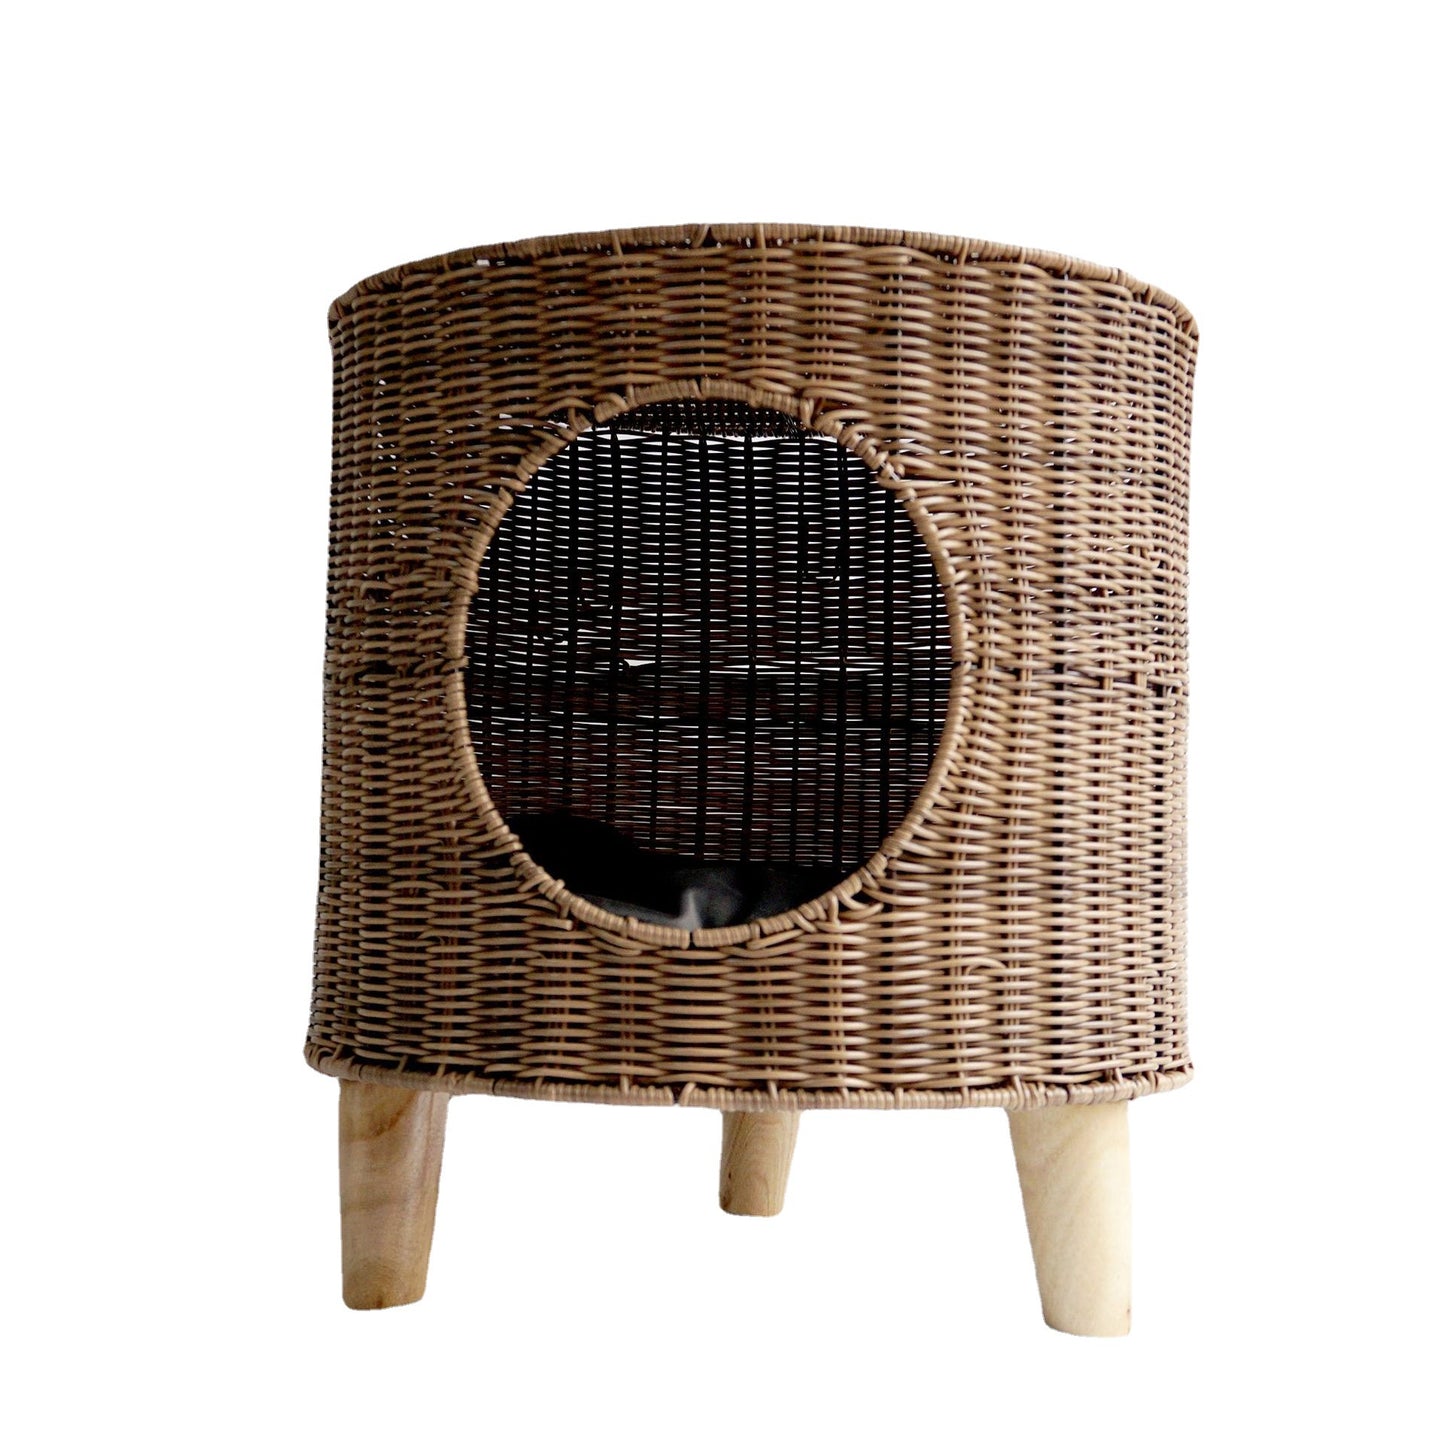 Removable and Washable Pet Warm Nest